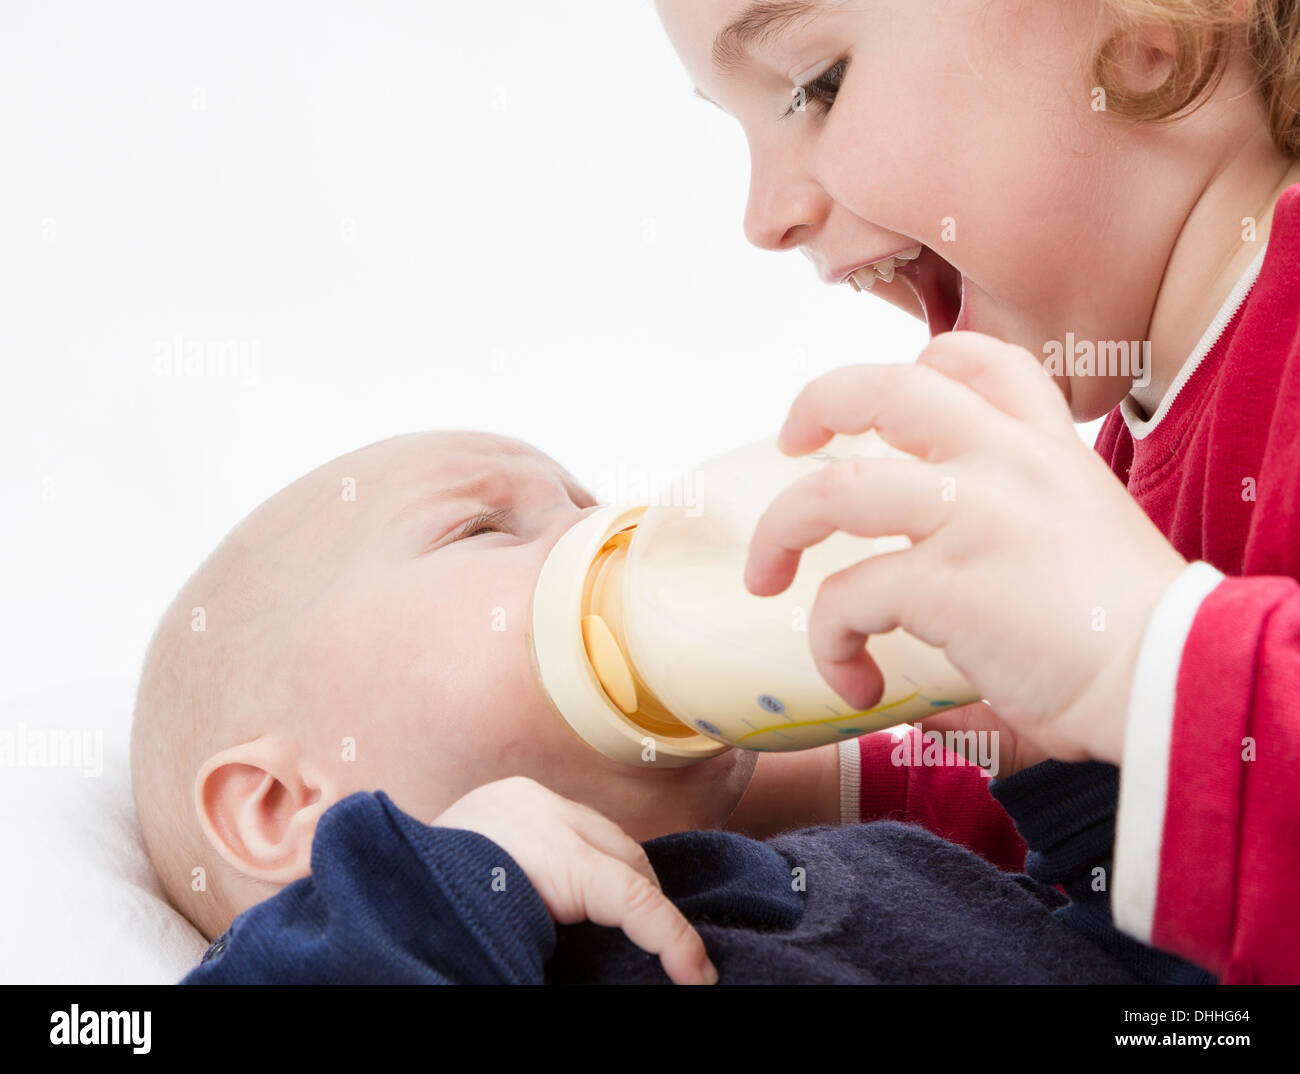 young, happy child feeding toddler with milk bottle in light background Stock Photo